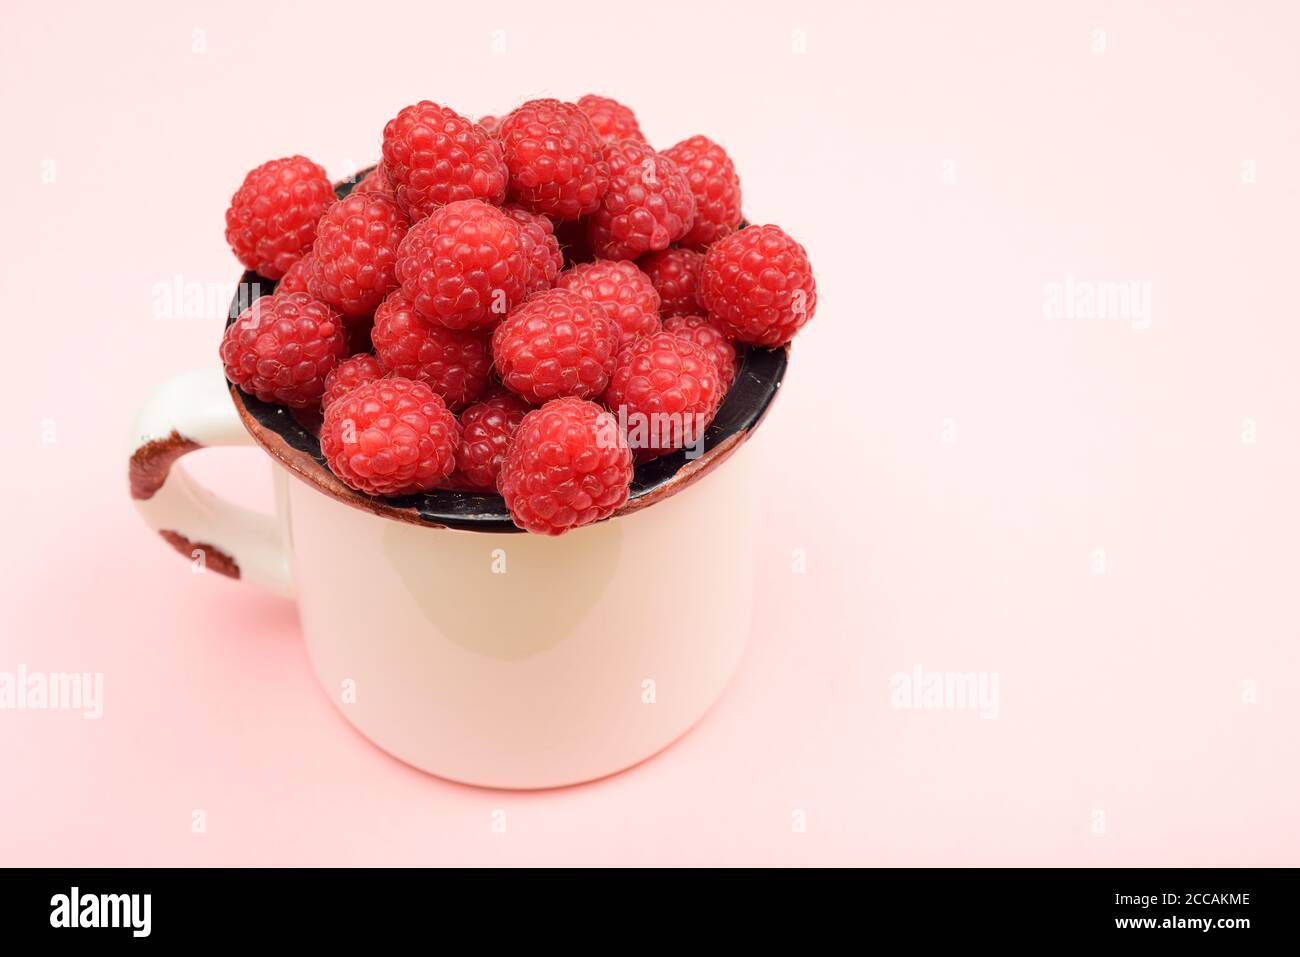 large ripe raspberries in a mug on a pink background Stock Photo